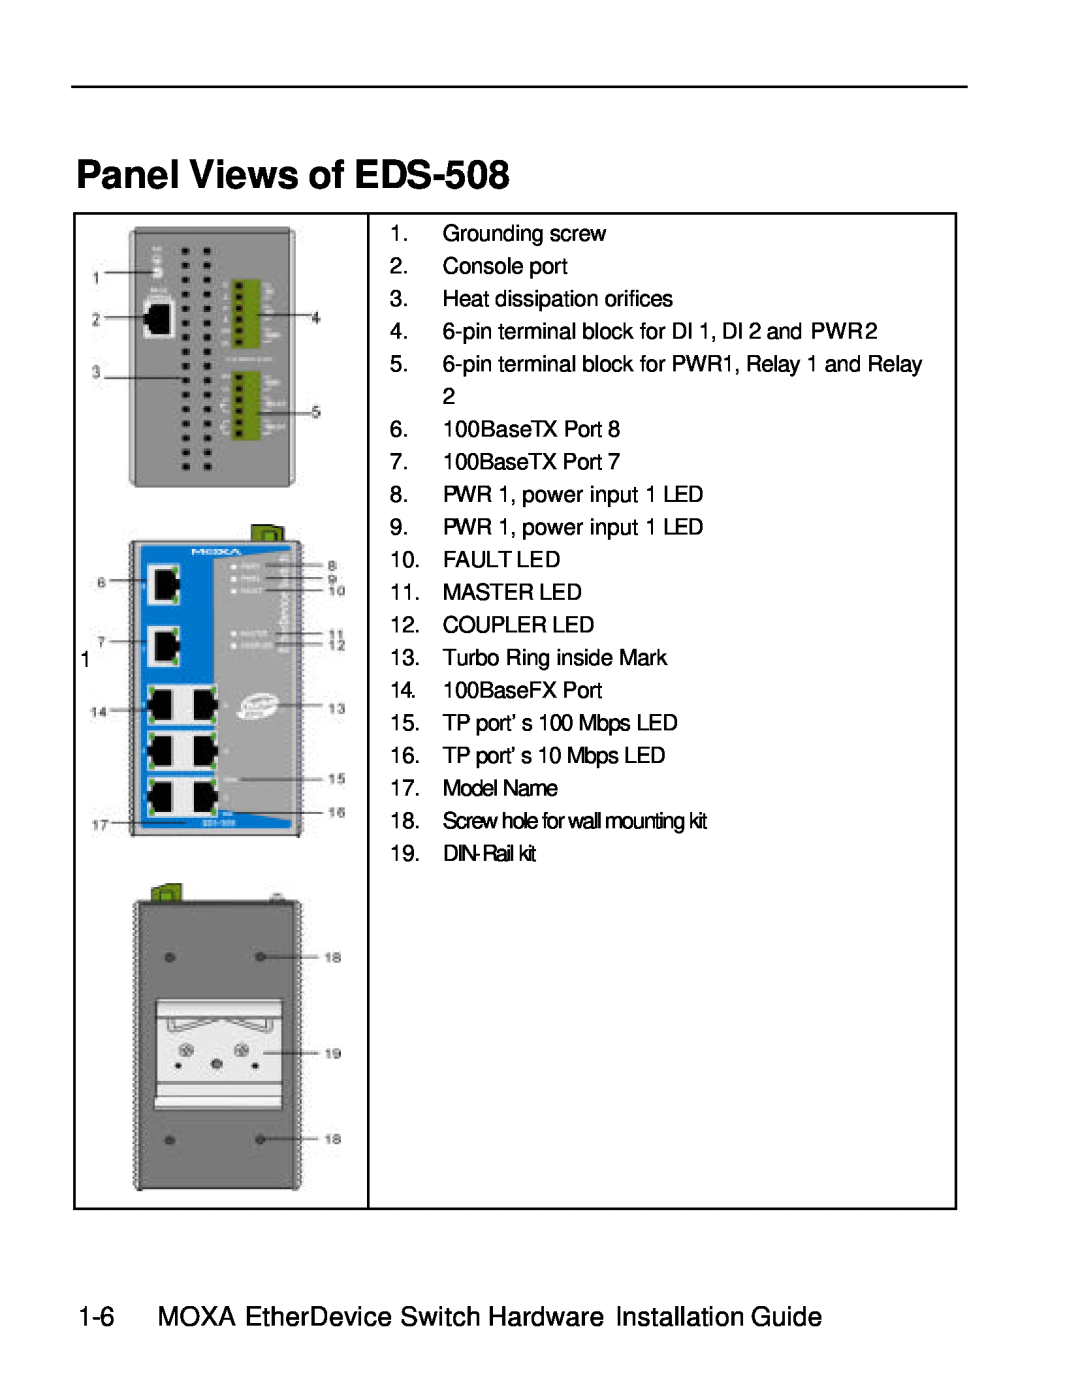 Moxa Technologies manual Panel Views of EDS-508, MOXA EtherDevice Switch Hardware Installation Guide 